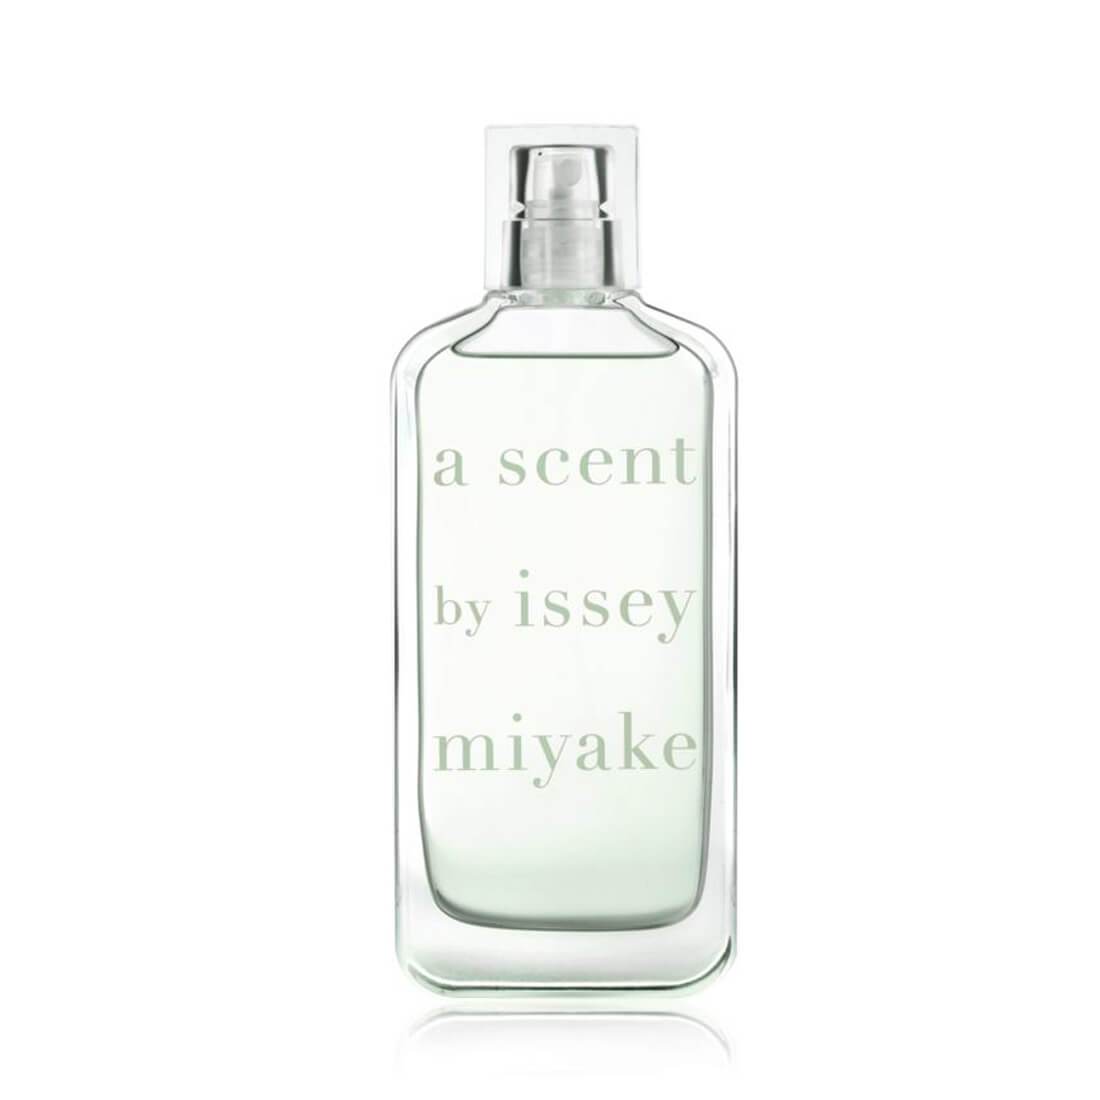 Issey Miyake A Scent by Issey Miyake EDT For Women - 50ml